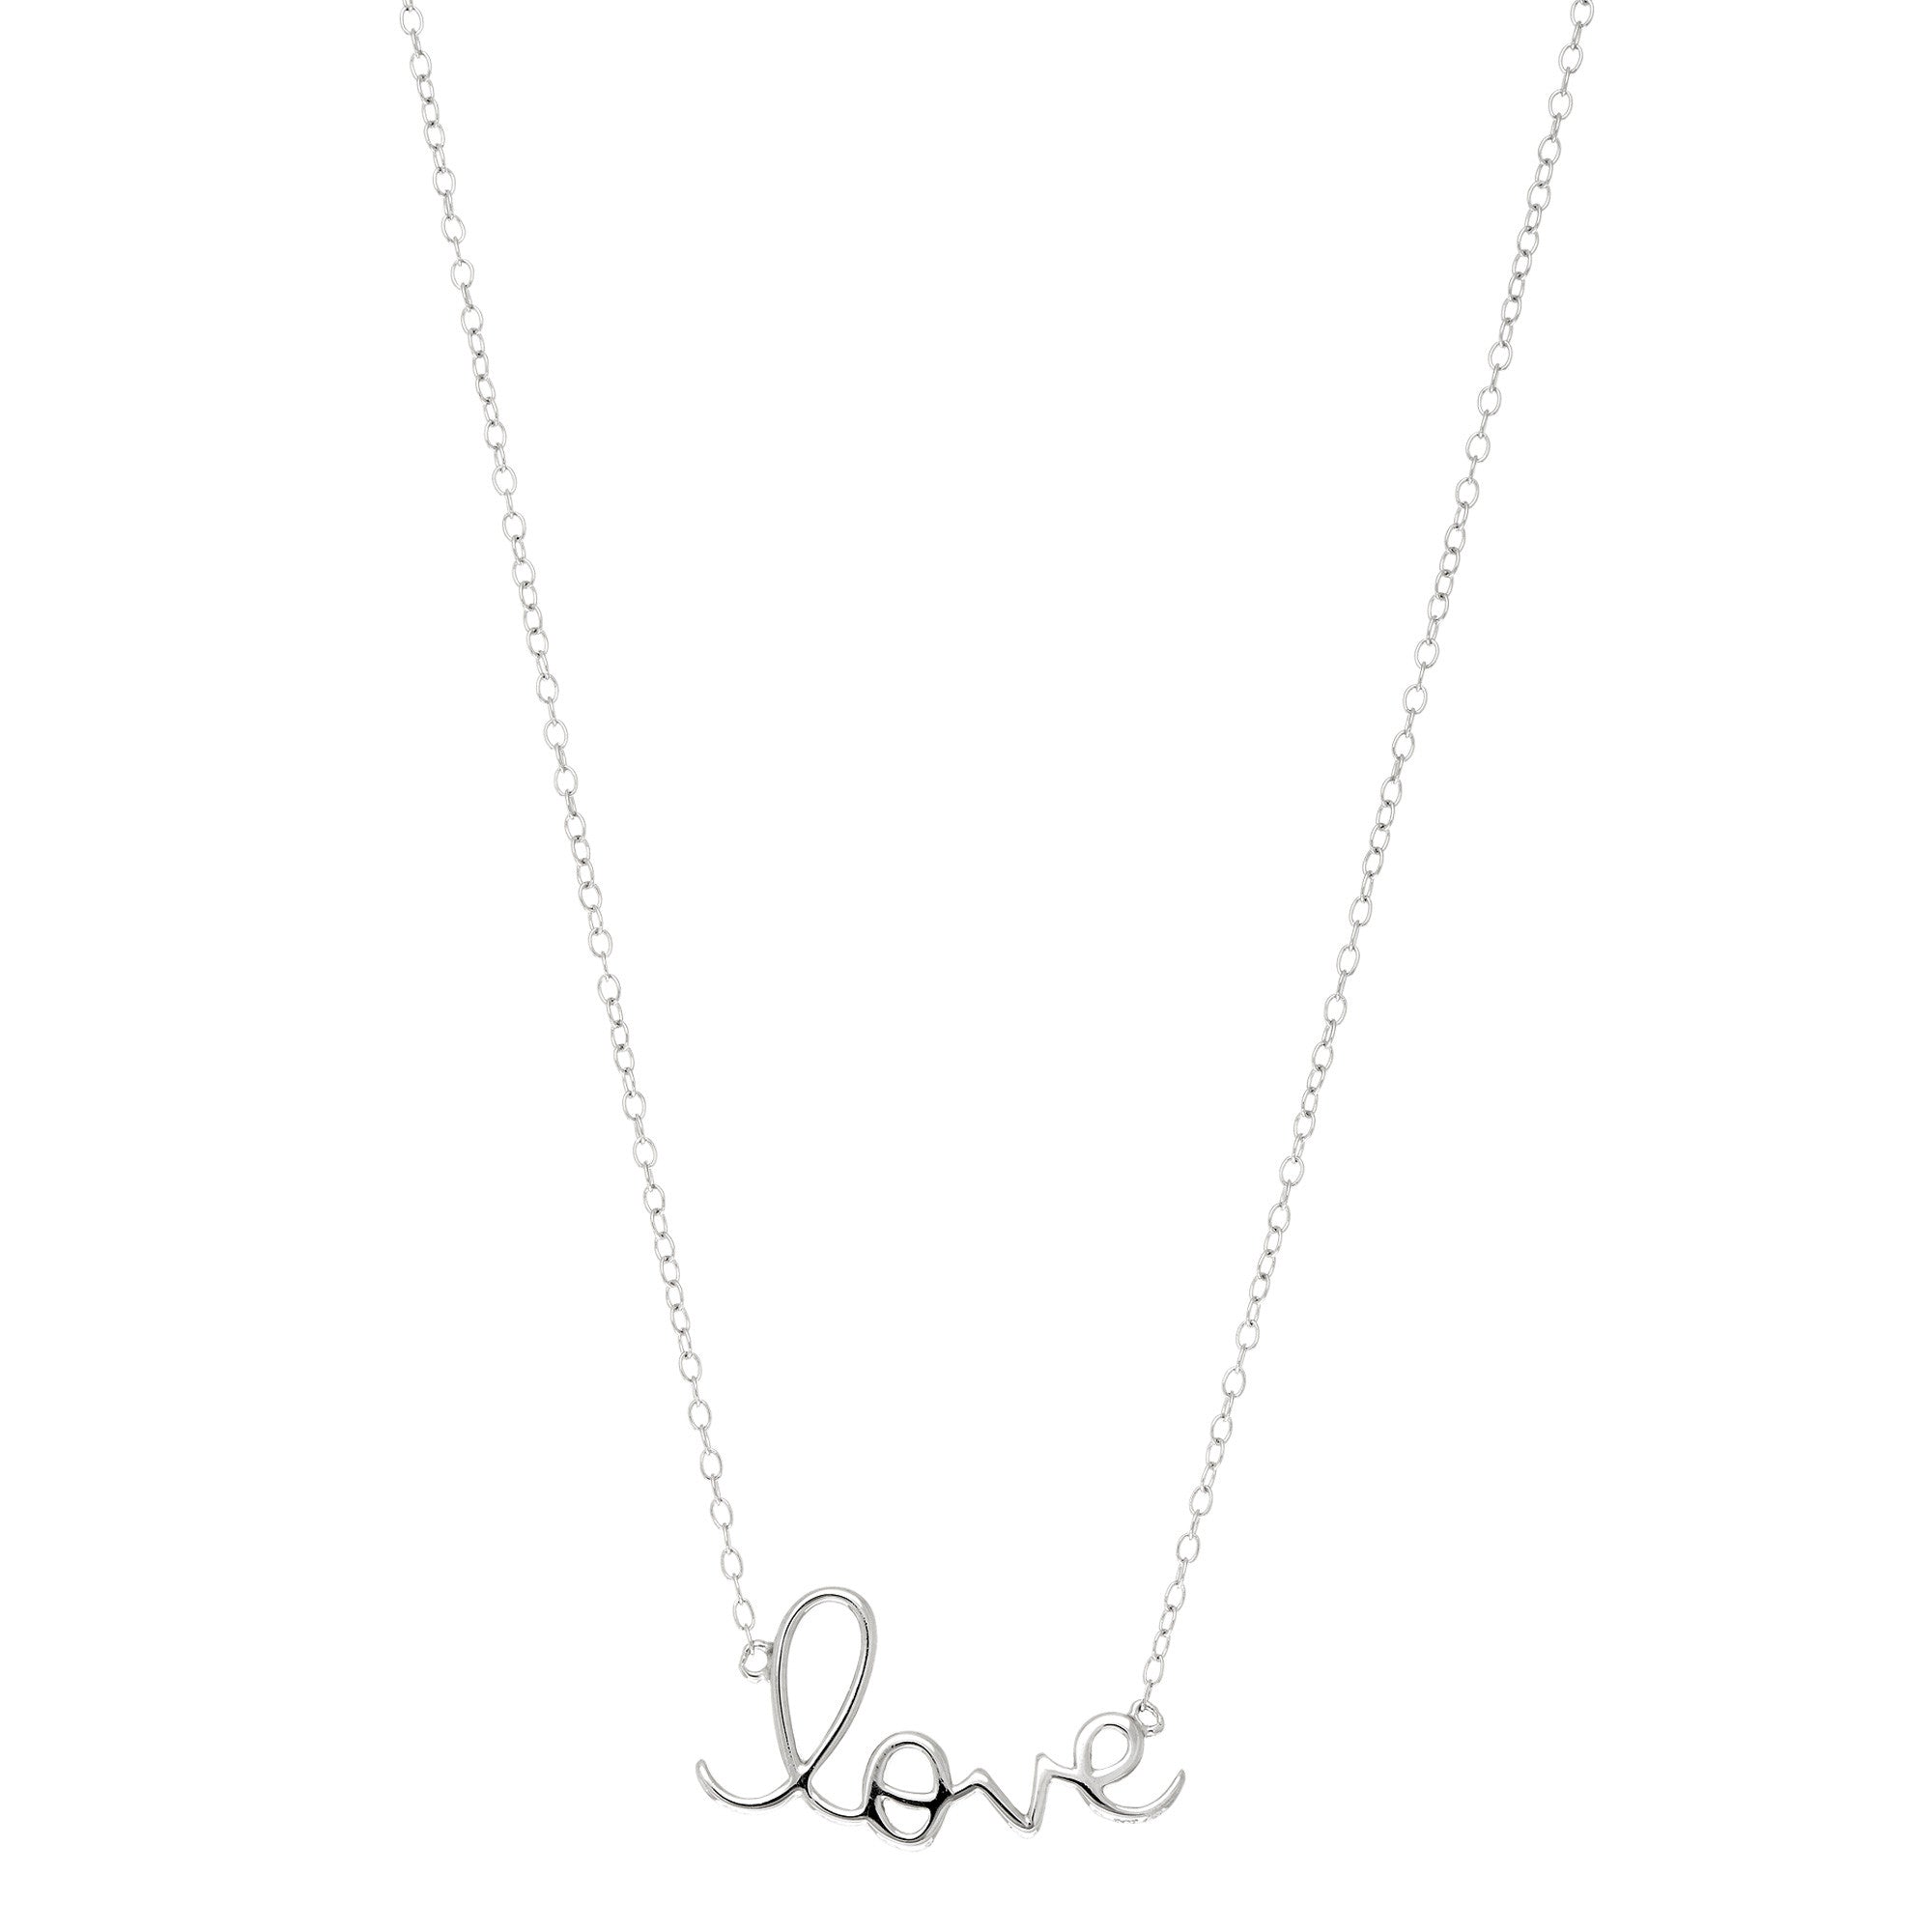 Script  Love Logo Necklace In Rhodium Plated Sterling Silver - 18 Inches - JewelryAffairs
 - 2